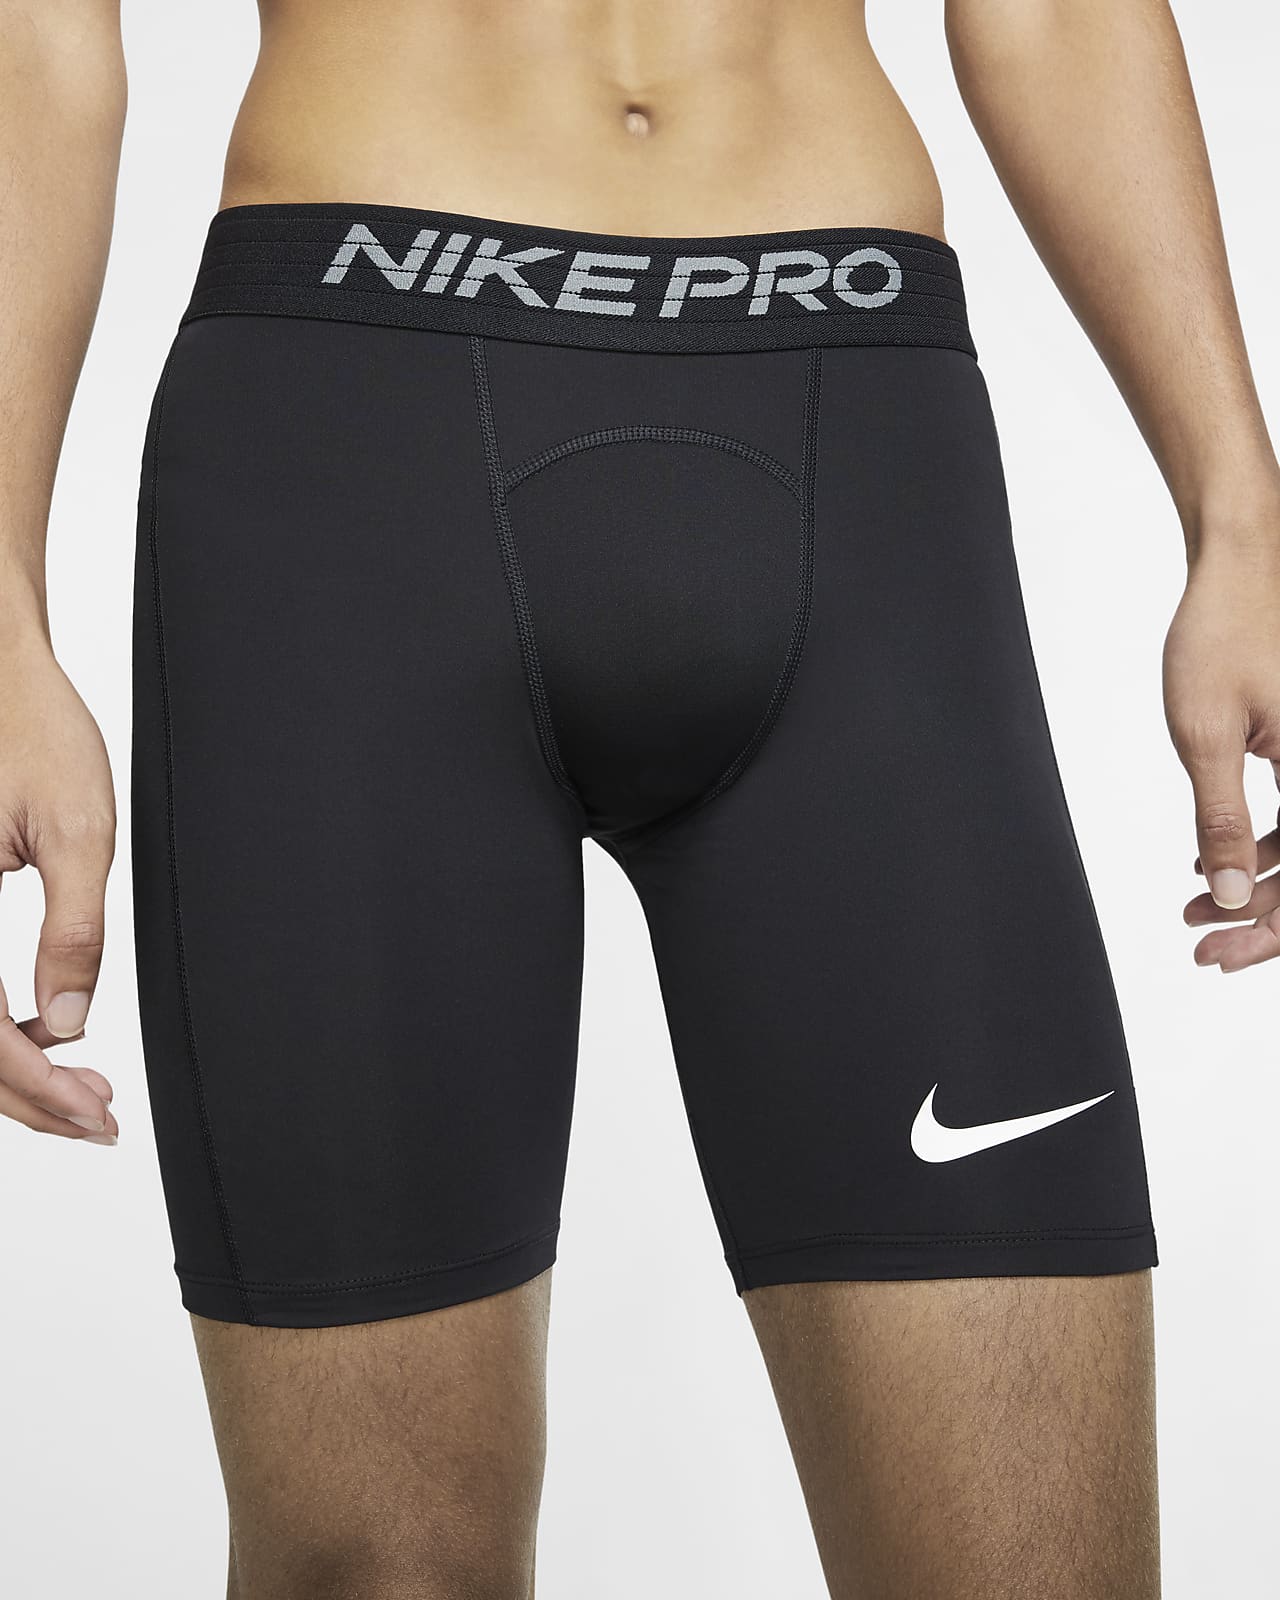 NIKE PRO NBA COMPRESSION SHORTS VARIOUS COLORS & SIZES BRAND NEW